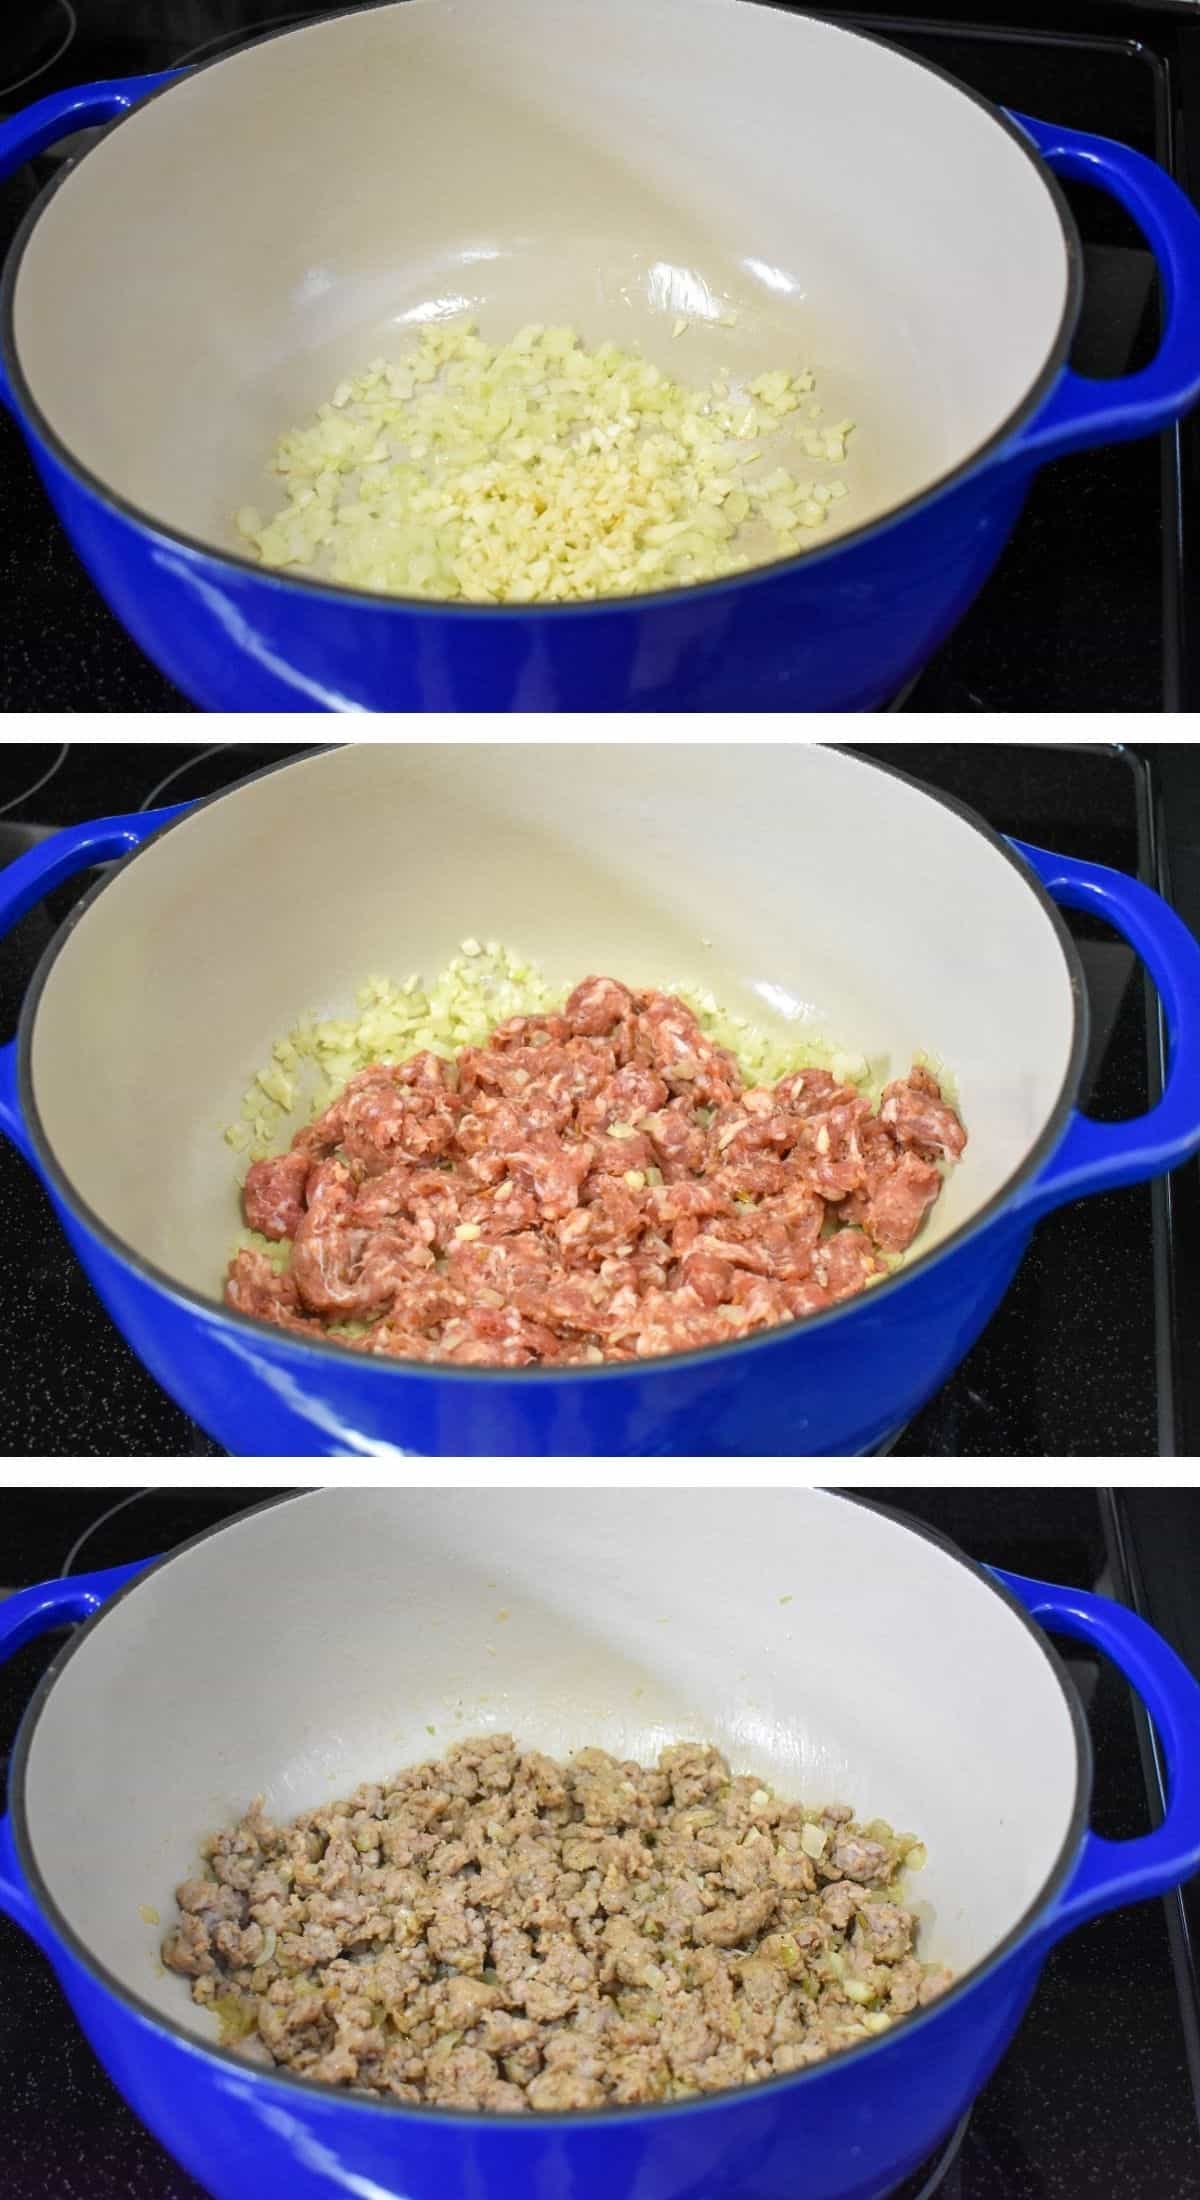 Three images showing the onions and garlic cooking and the Italian sausage browning.